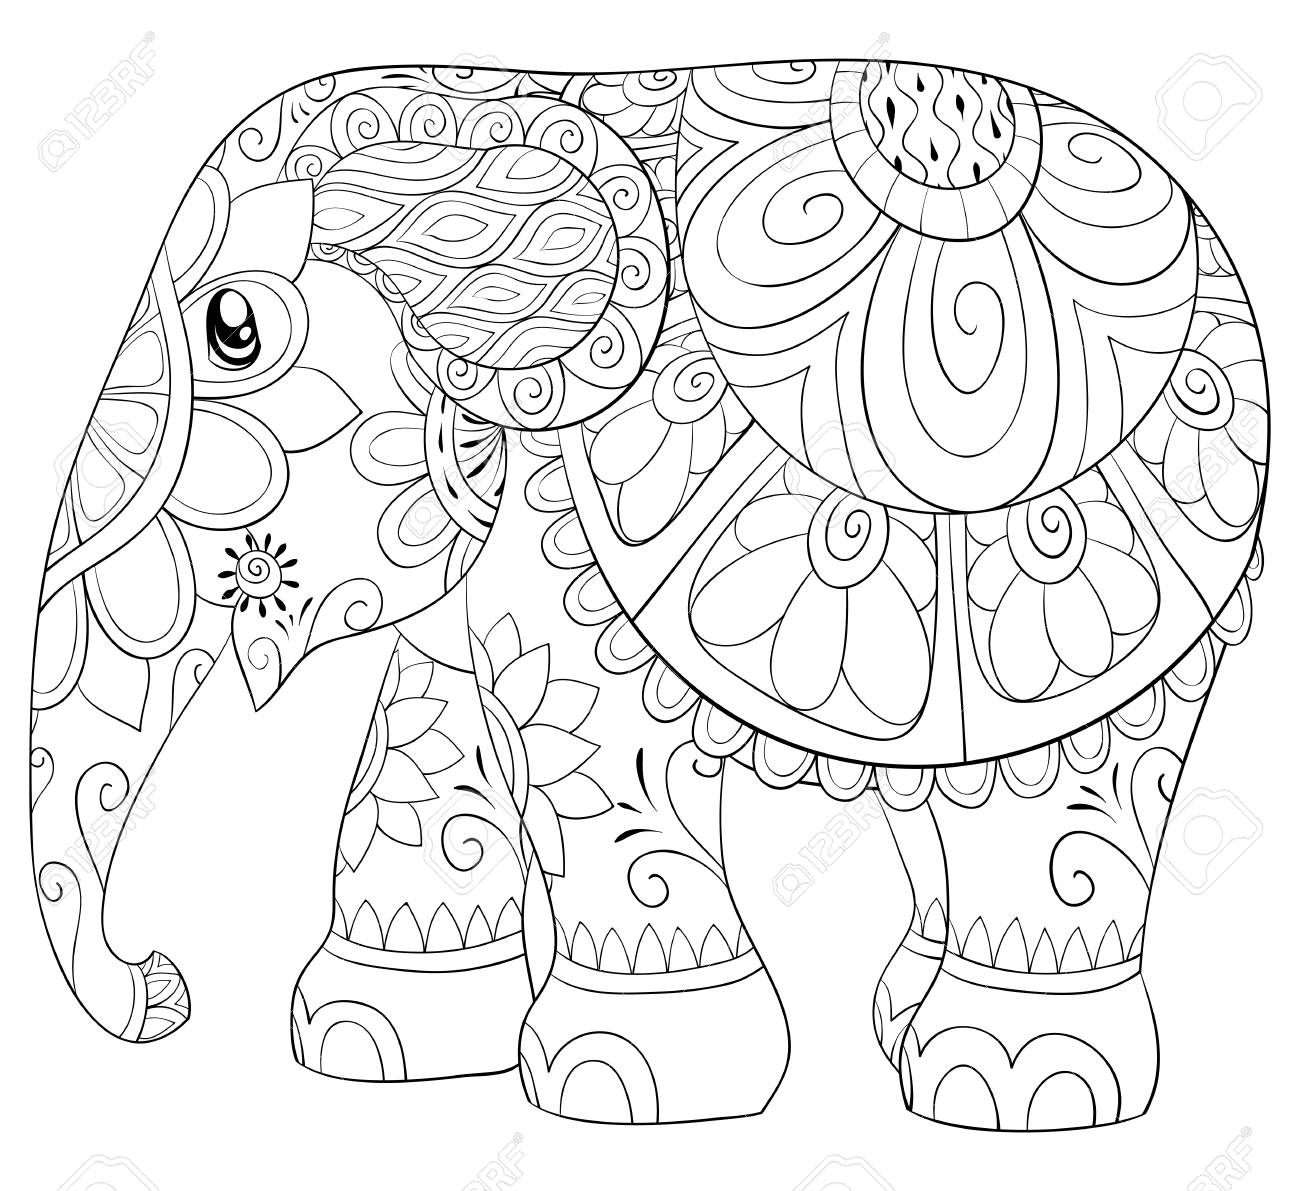 Adult coloring book page for relaxingzen art style illustration for print royalty free svg cliparts vectors and stock illustration image